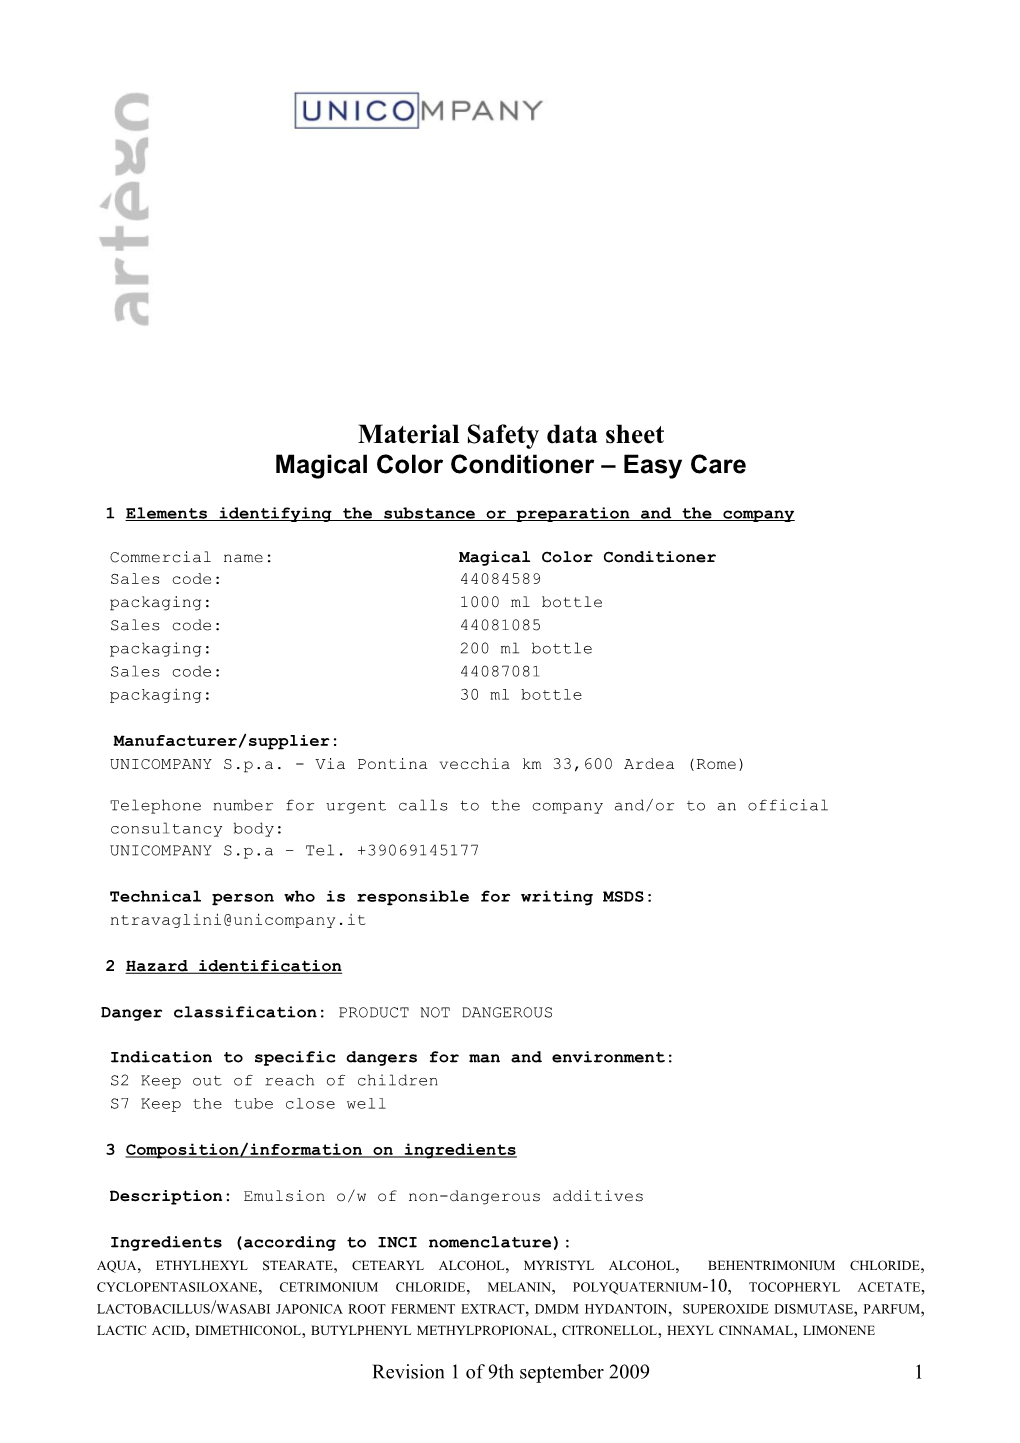 Material Safety Data Sheet s115